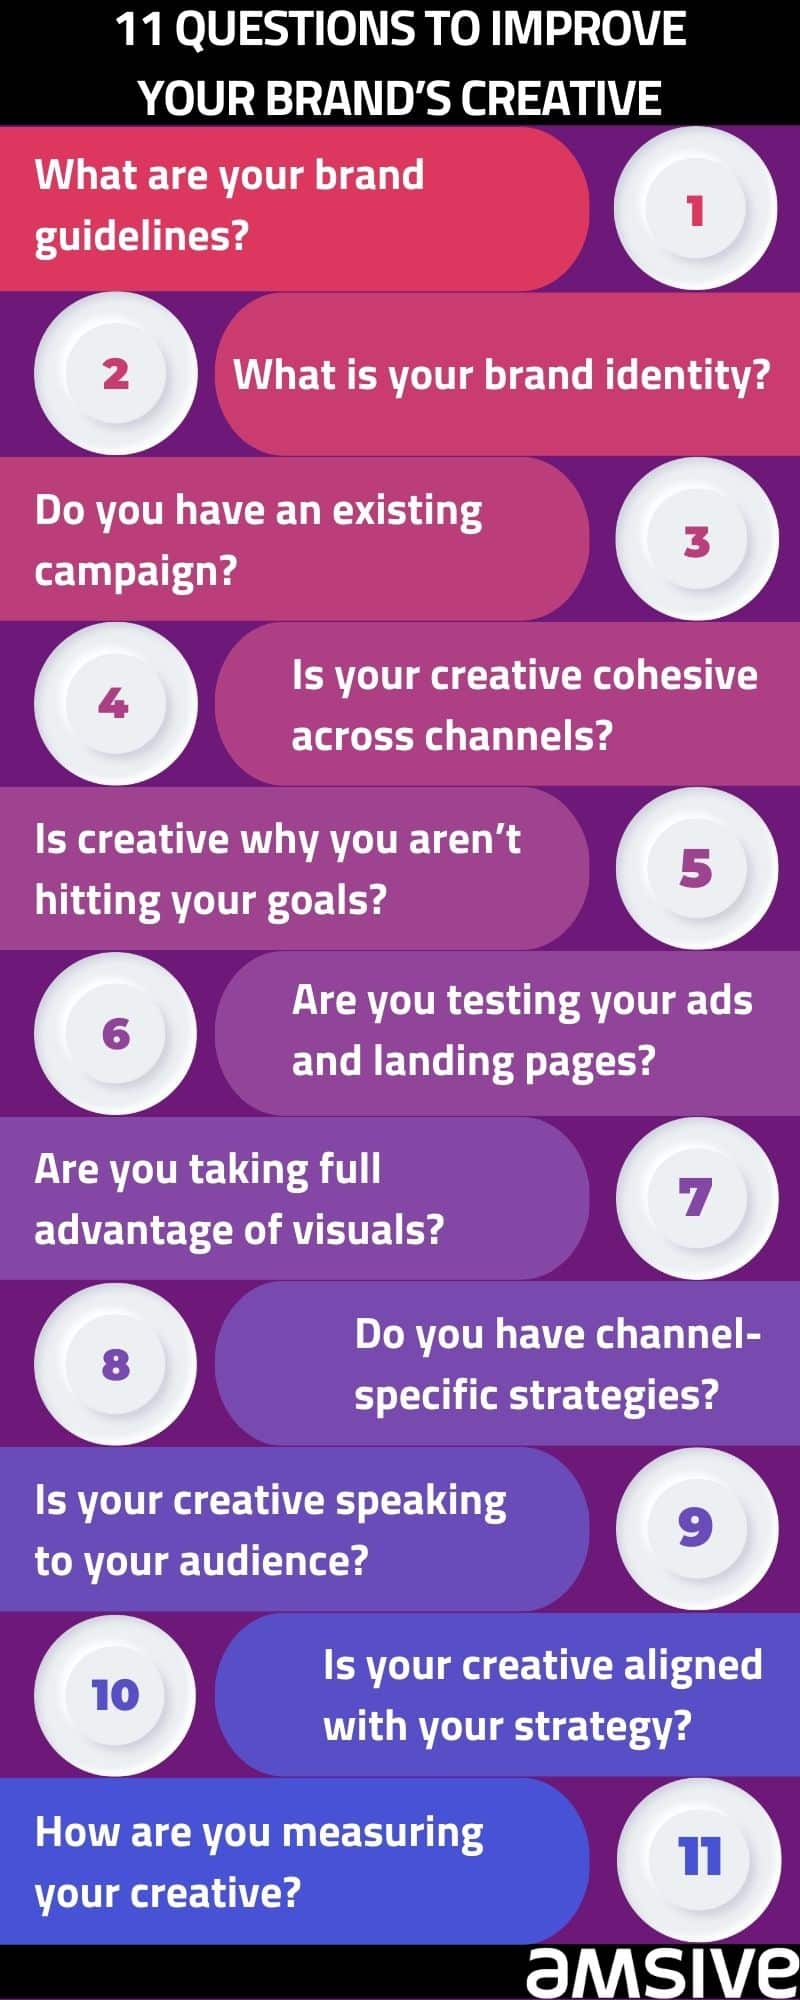 Infographic of 11 questions to improve your brand's creative:
1. What Are Your Brand Guidelines?
2. What is Your Brand Identity?
3. Do You Have an Existing Campaign?
4. Is Your Creative Cohesive Across Channels?
5. Is Creative Why You Aren't Hitting Your Goals?
6. Are You Testing Your Ads and Landing Pages?
7. Are You Taking Full Advantage of Visuals?
8. Do You Have Channel-Specific Strategies?
9. Is Your Creative Speaking to Your Audience?
10. Is Your Creative Aligned With Your Strategy?
11. How Are You Measuring Your Creative?